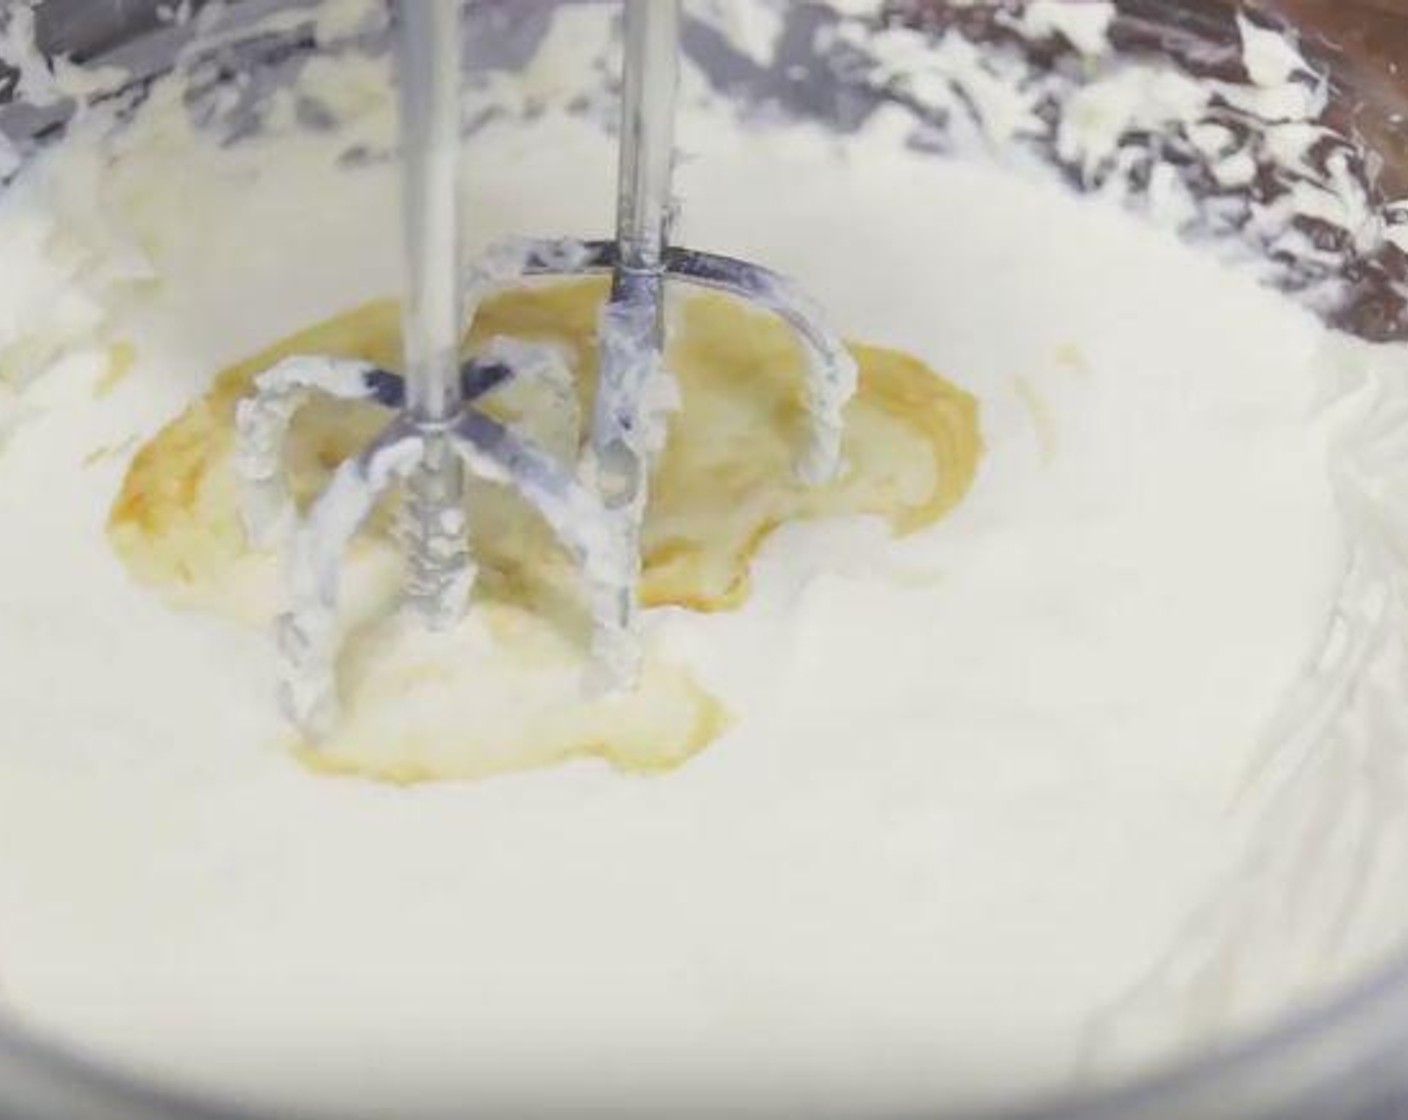 step 6 To make the cheesecake filling: In a bowl, add Cream Cheese (1 1/2 cups), Granulated Sugar (1/2 cup) and Lemon (1/2). Cream together until is smooth and fluffy. Add Heavy Cream (1 cup) and Vanilla Extract (1/2 tsp) and mix until the mixture thickens. Fold in Lemon (1) cover it and refrigerate until ready to use.